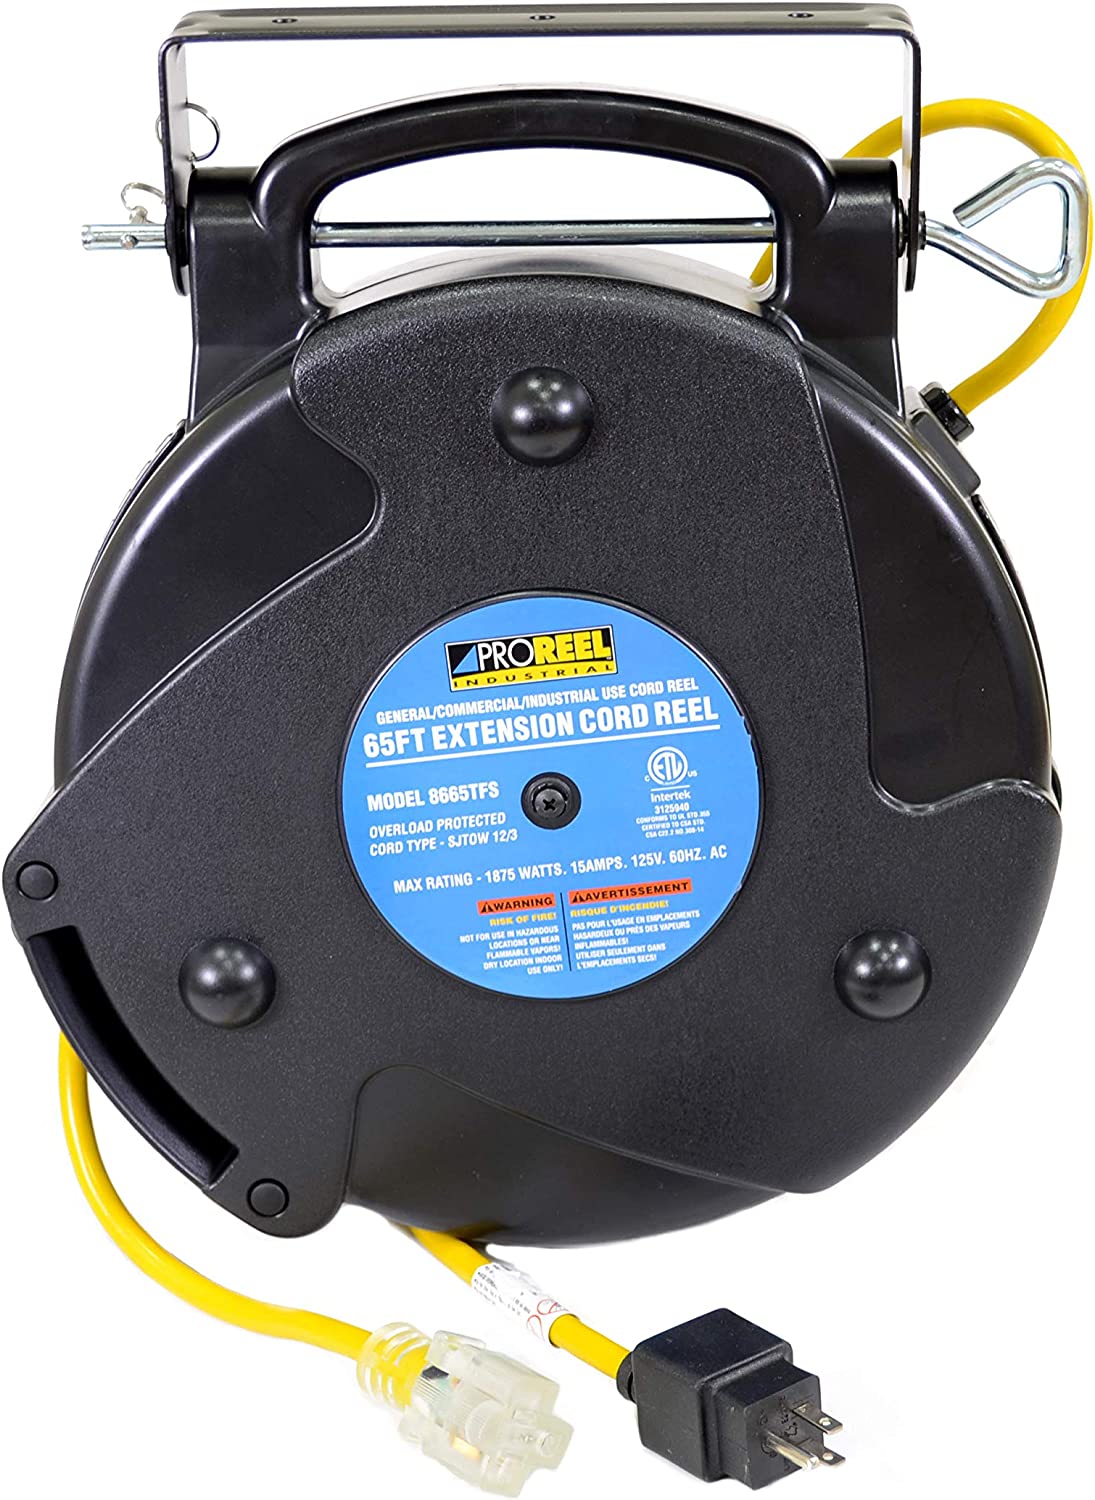 Alert Stamping 8665TFS Heavy Duty 12/3 65 Foot Single Tap Industrial Retractable  Extension Cord Reel